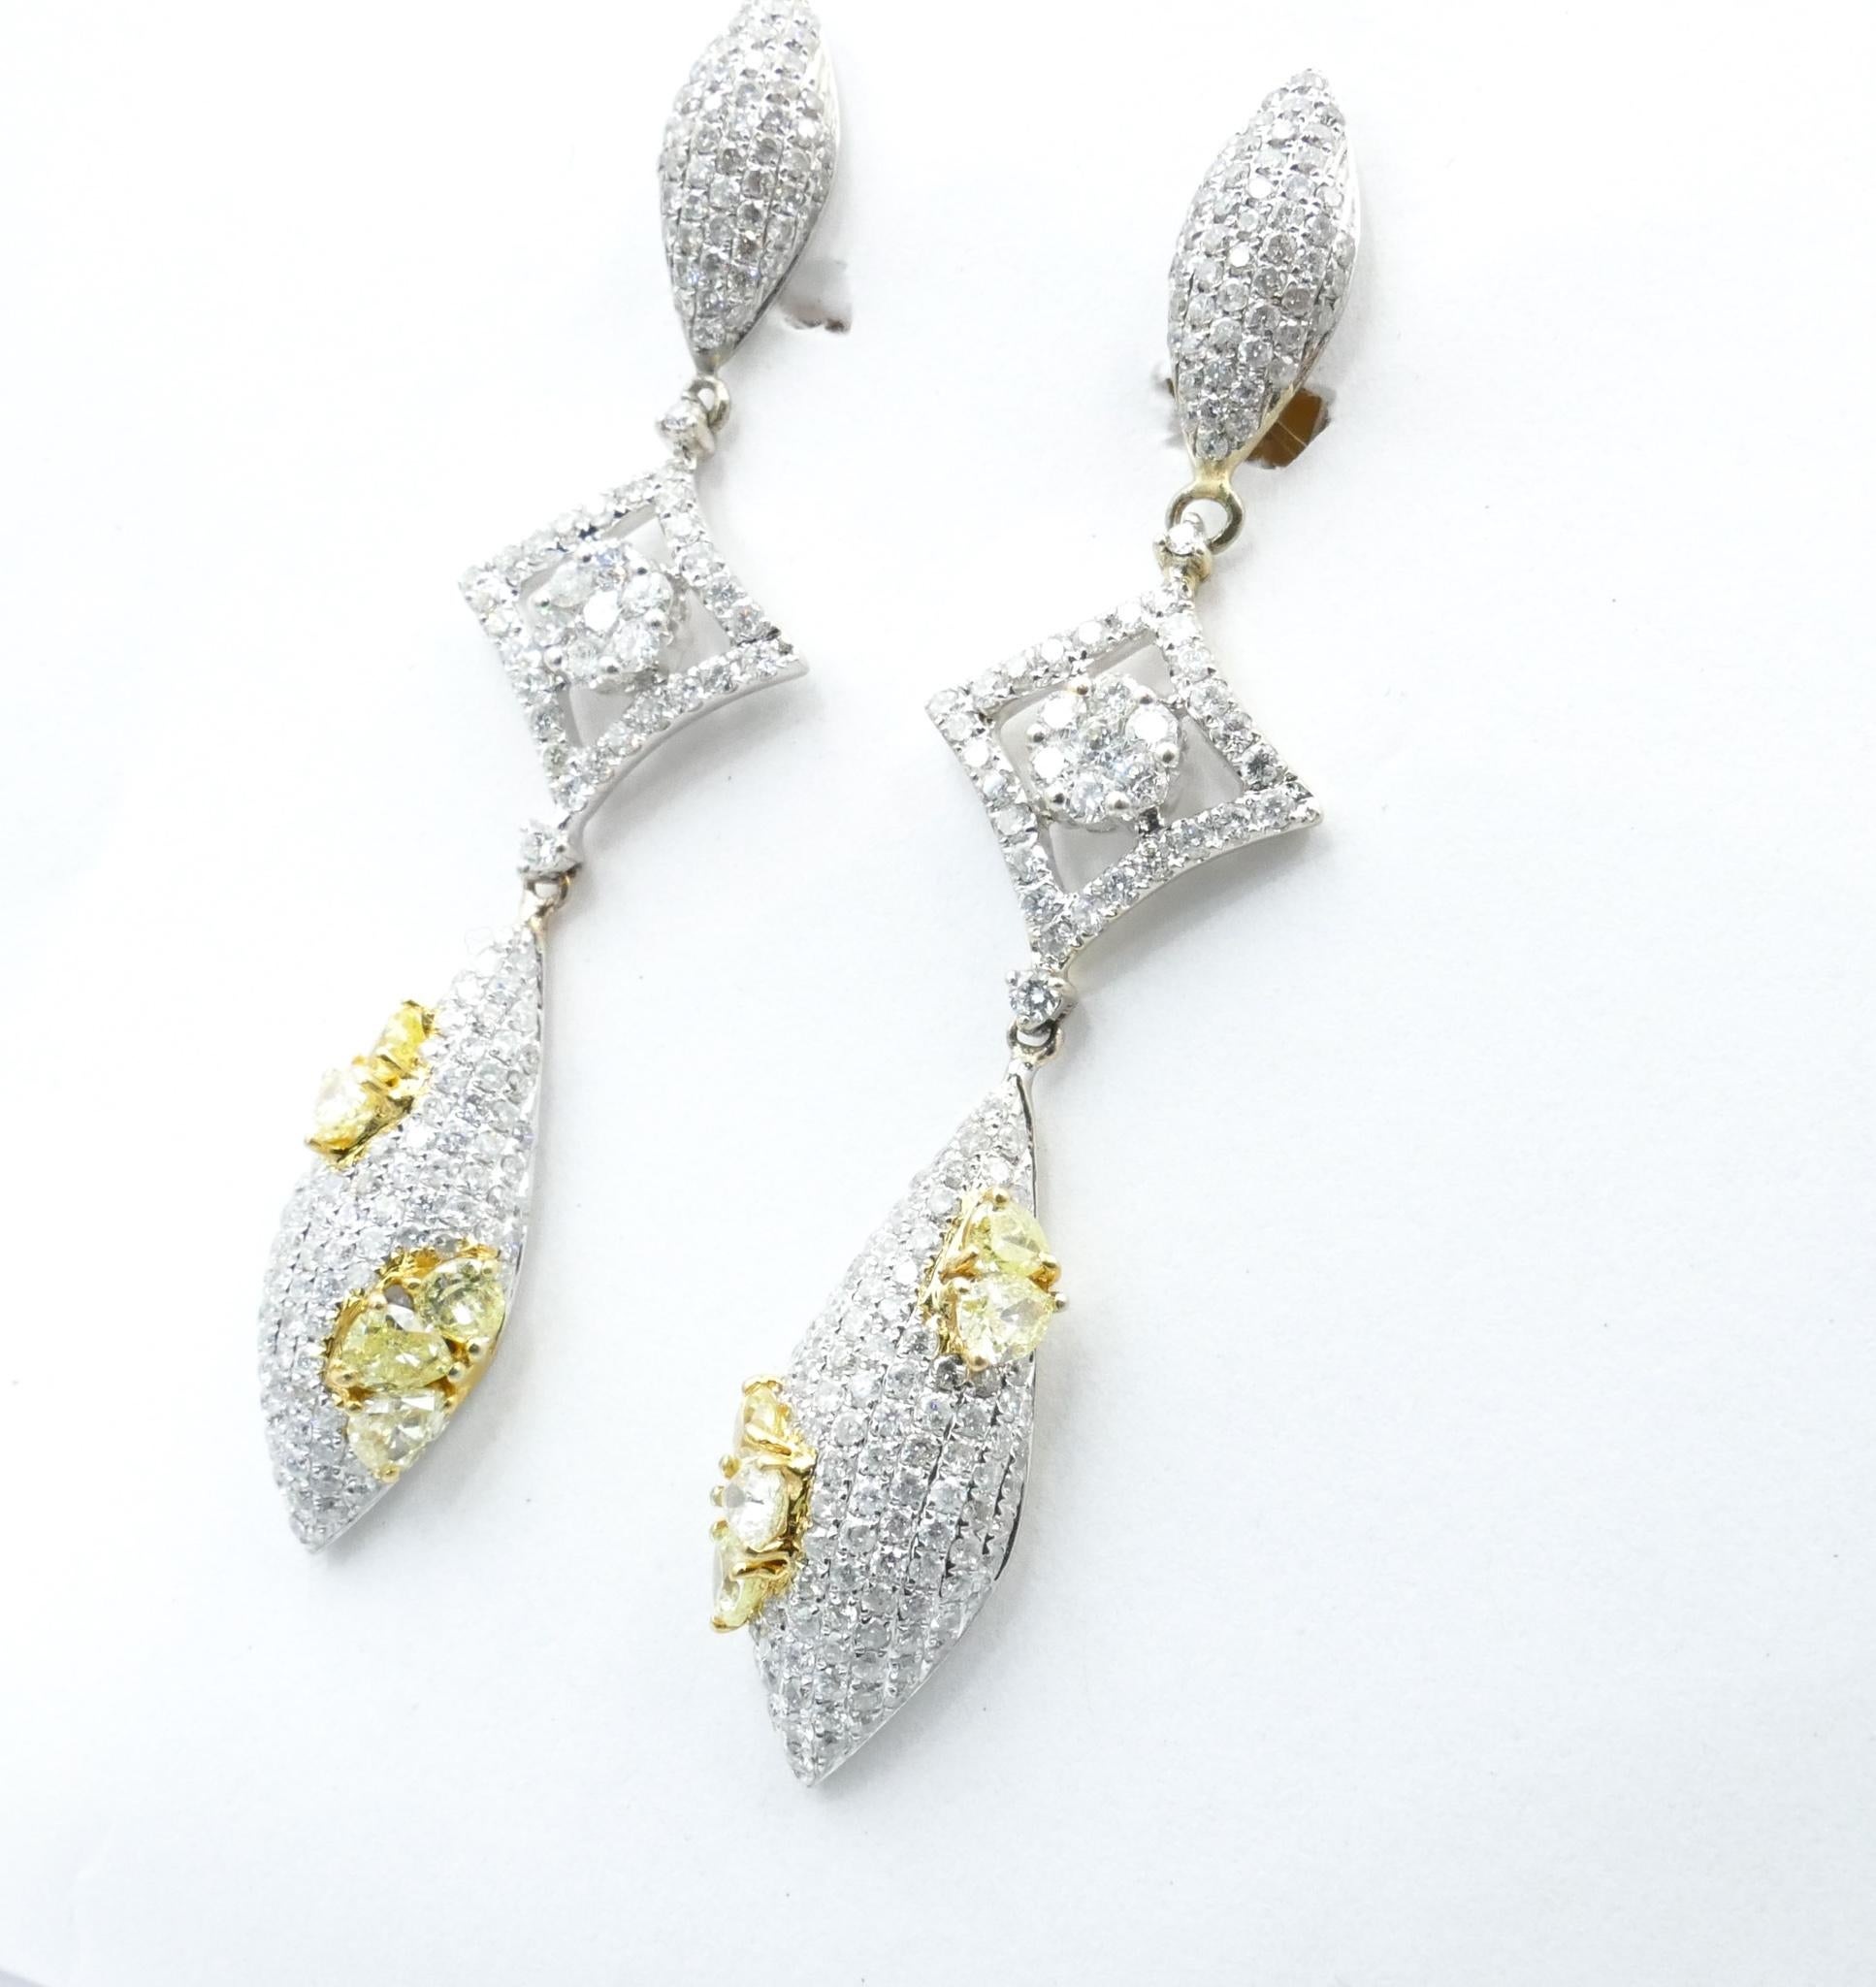 The Earrings have 10 Pear Shaped Yellow Diamonds totally 1.57 Carats, claw set & 386 Round Brilliant Cut White Diamonds, Colour F, Pave Set & totalling 4.19Carats.
Total Weight of Diamonds is an estimated 5.76 Carats
Total Weight of Earrings